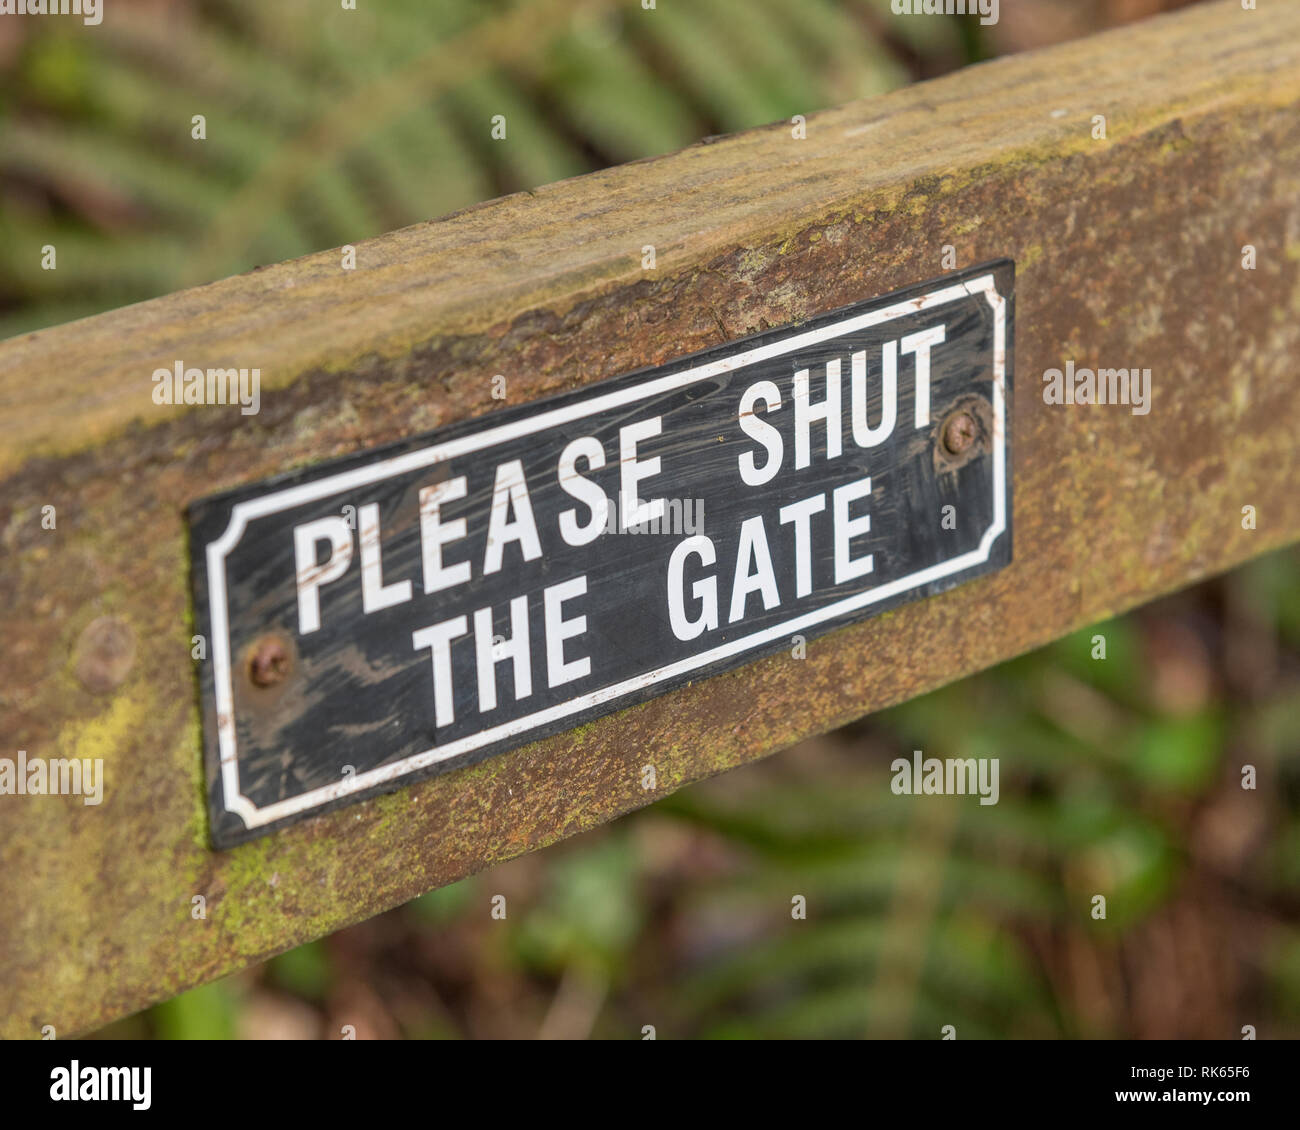 Farm gate asking walkers to 'Shut the Gate'. Metaphor Countryside Code. Stock Photo